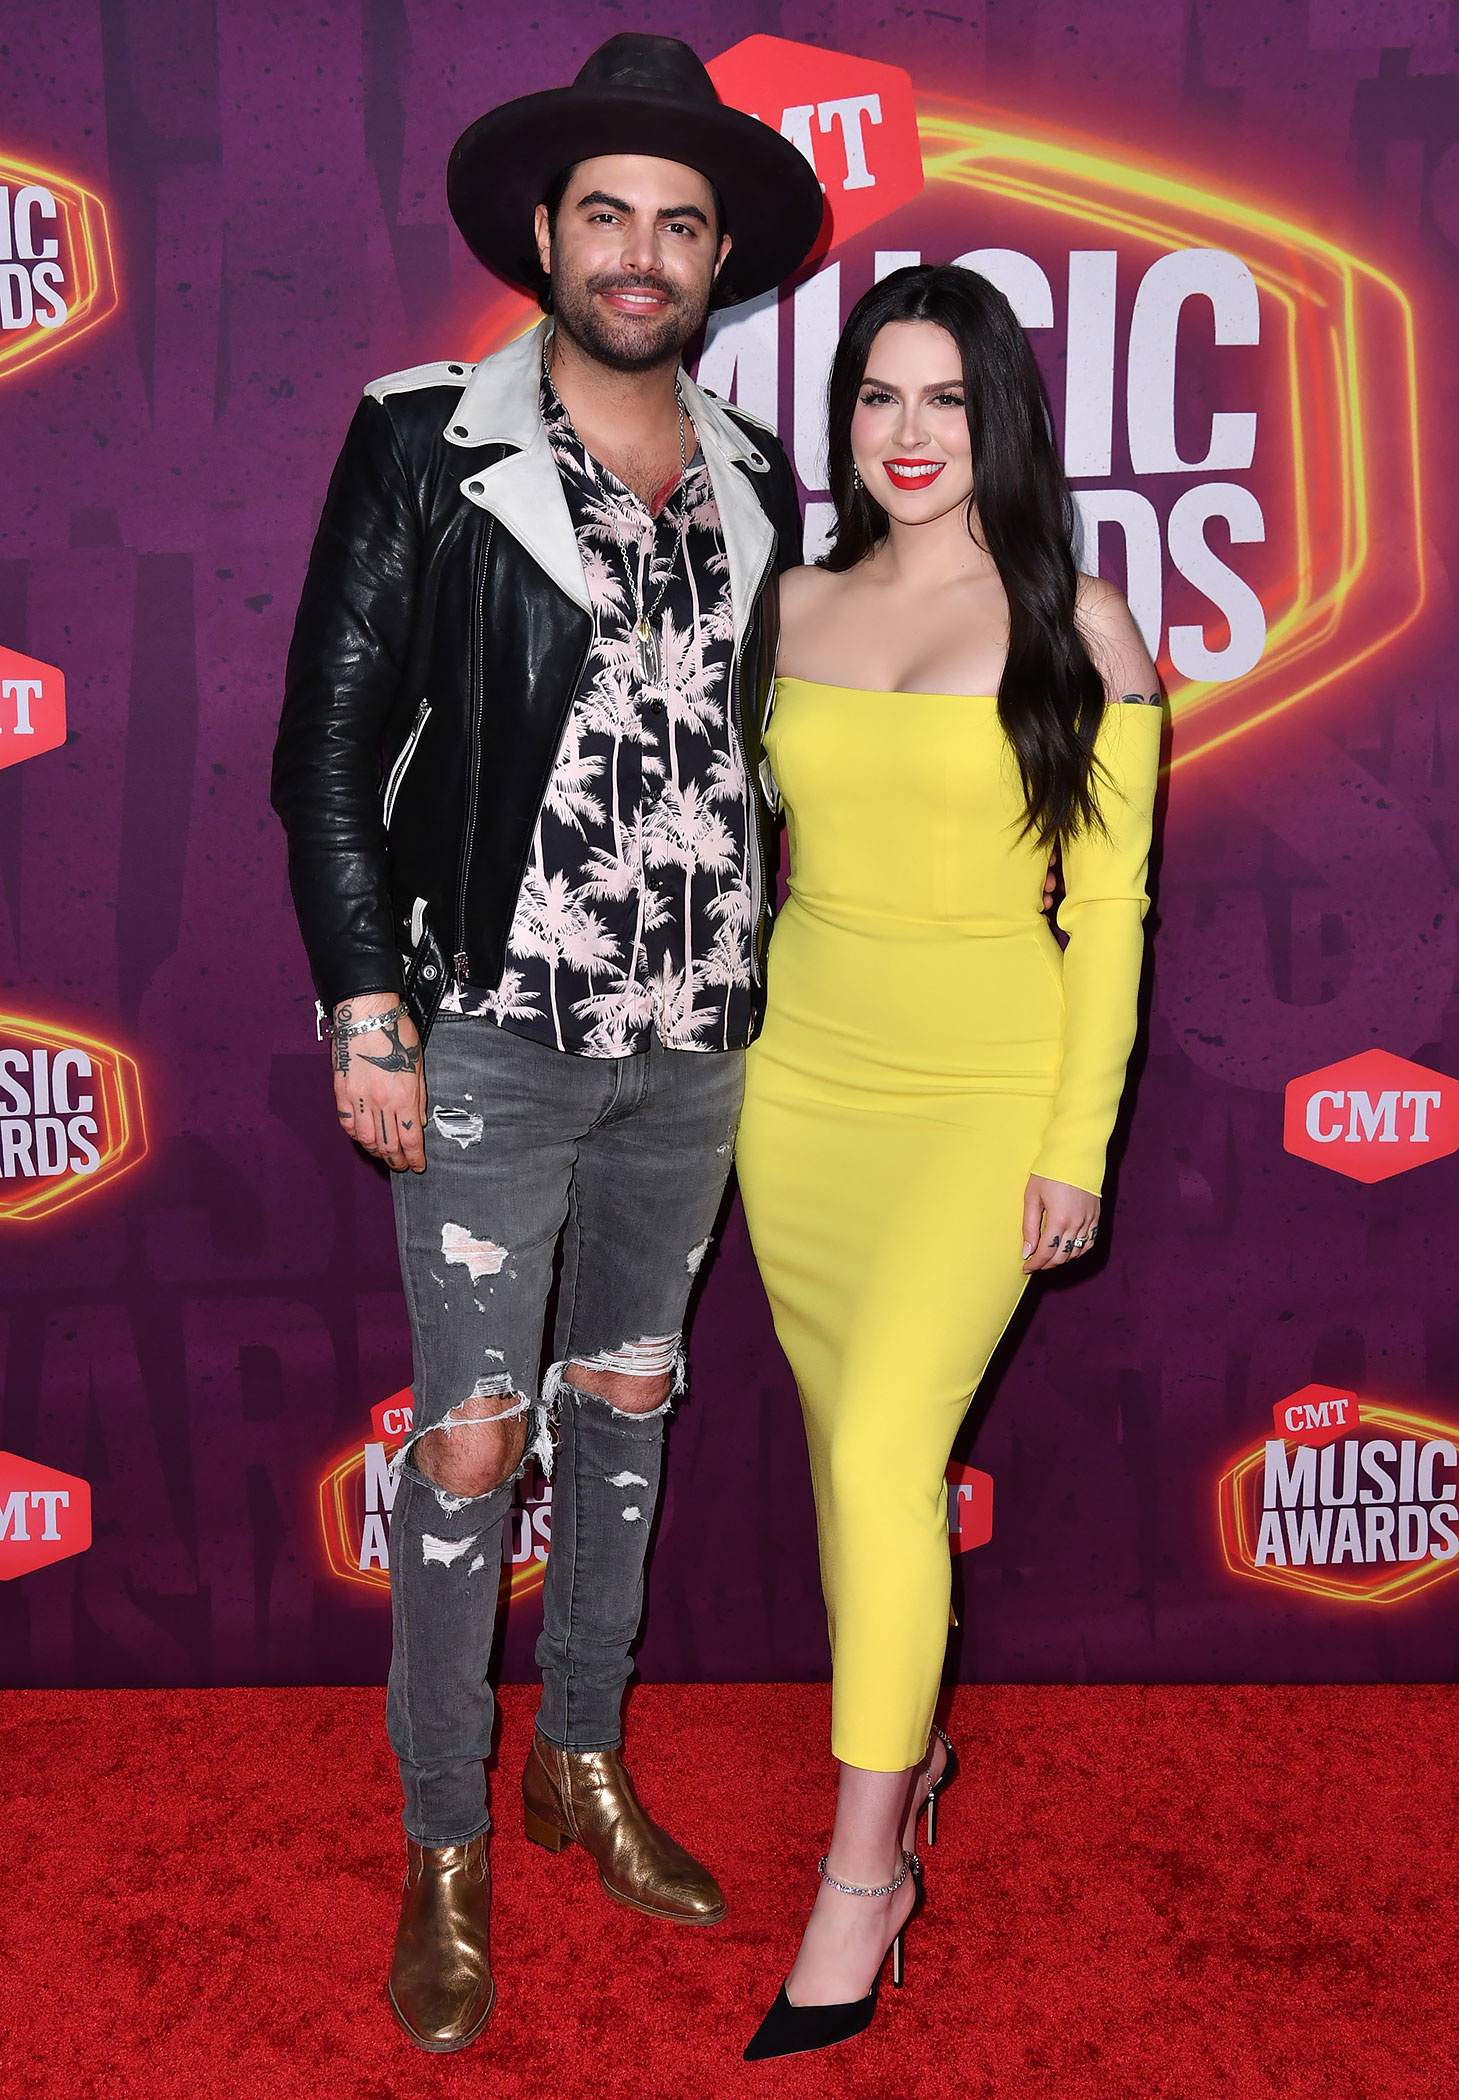 Niko Moon, CMT Music Awards 2021, Country music couples, Red carpet event, 1460x2100 HD Handy